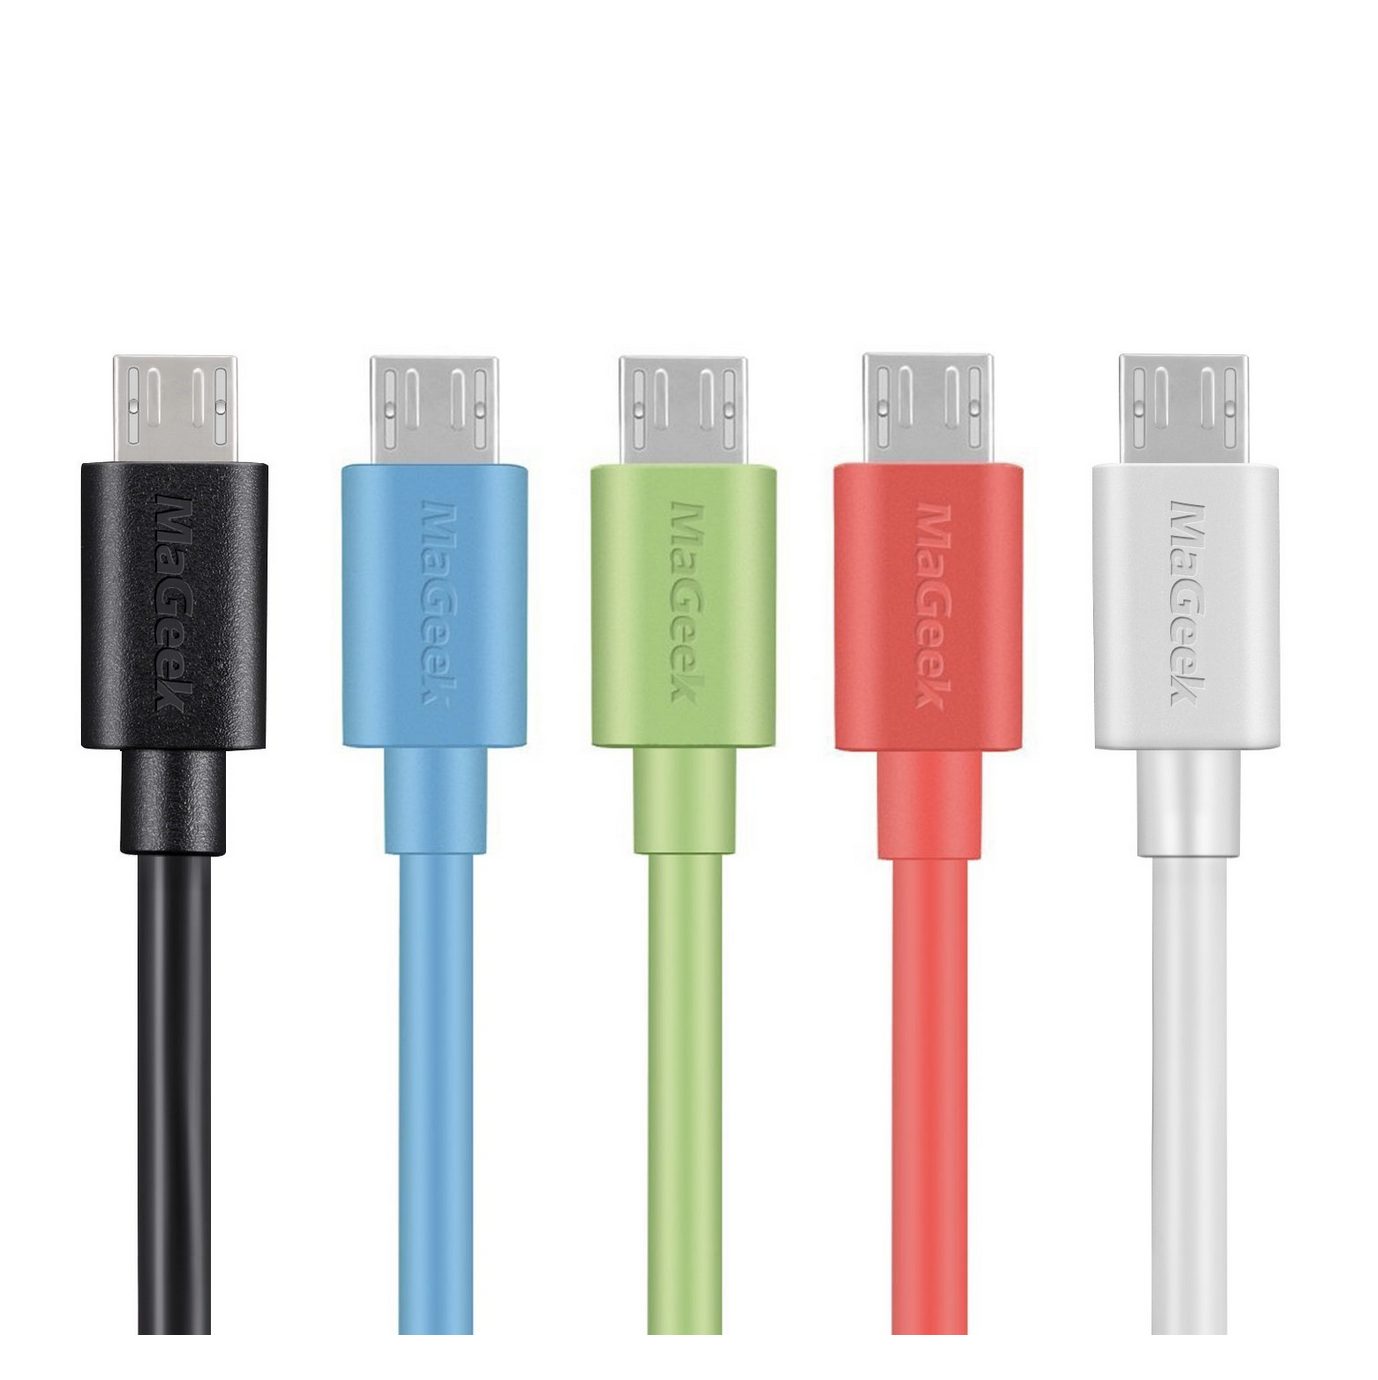 MaGeek Micro USB Cable Fast Charging Data Cables 3.3 FT